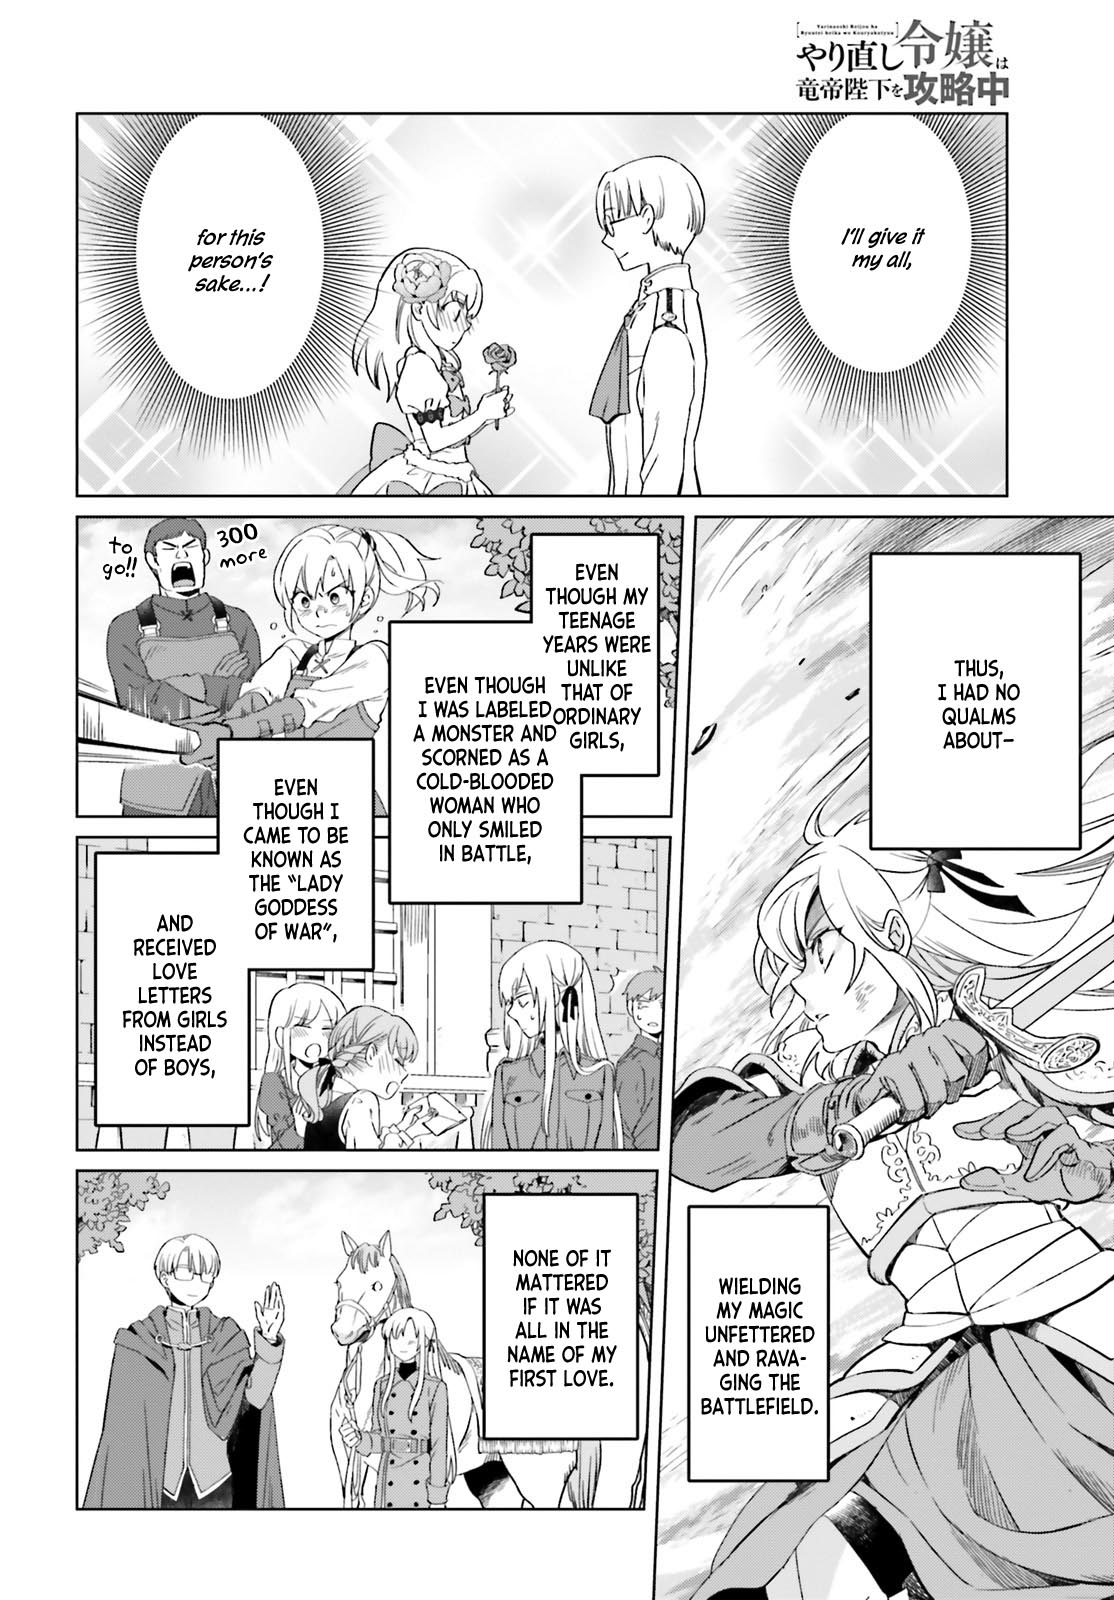 Win Over The Dragon Emperor This Time Around, Noble Girl! Ch. 1